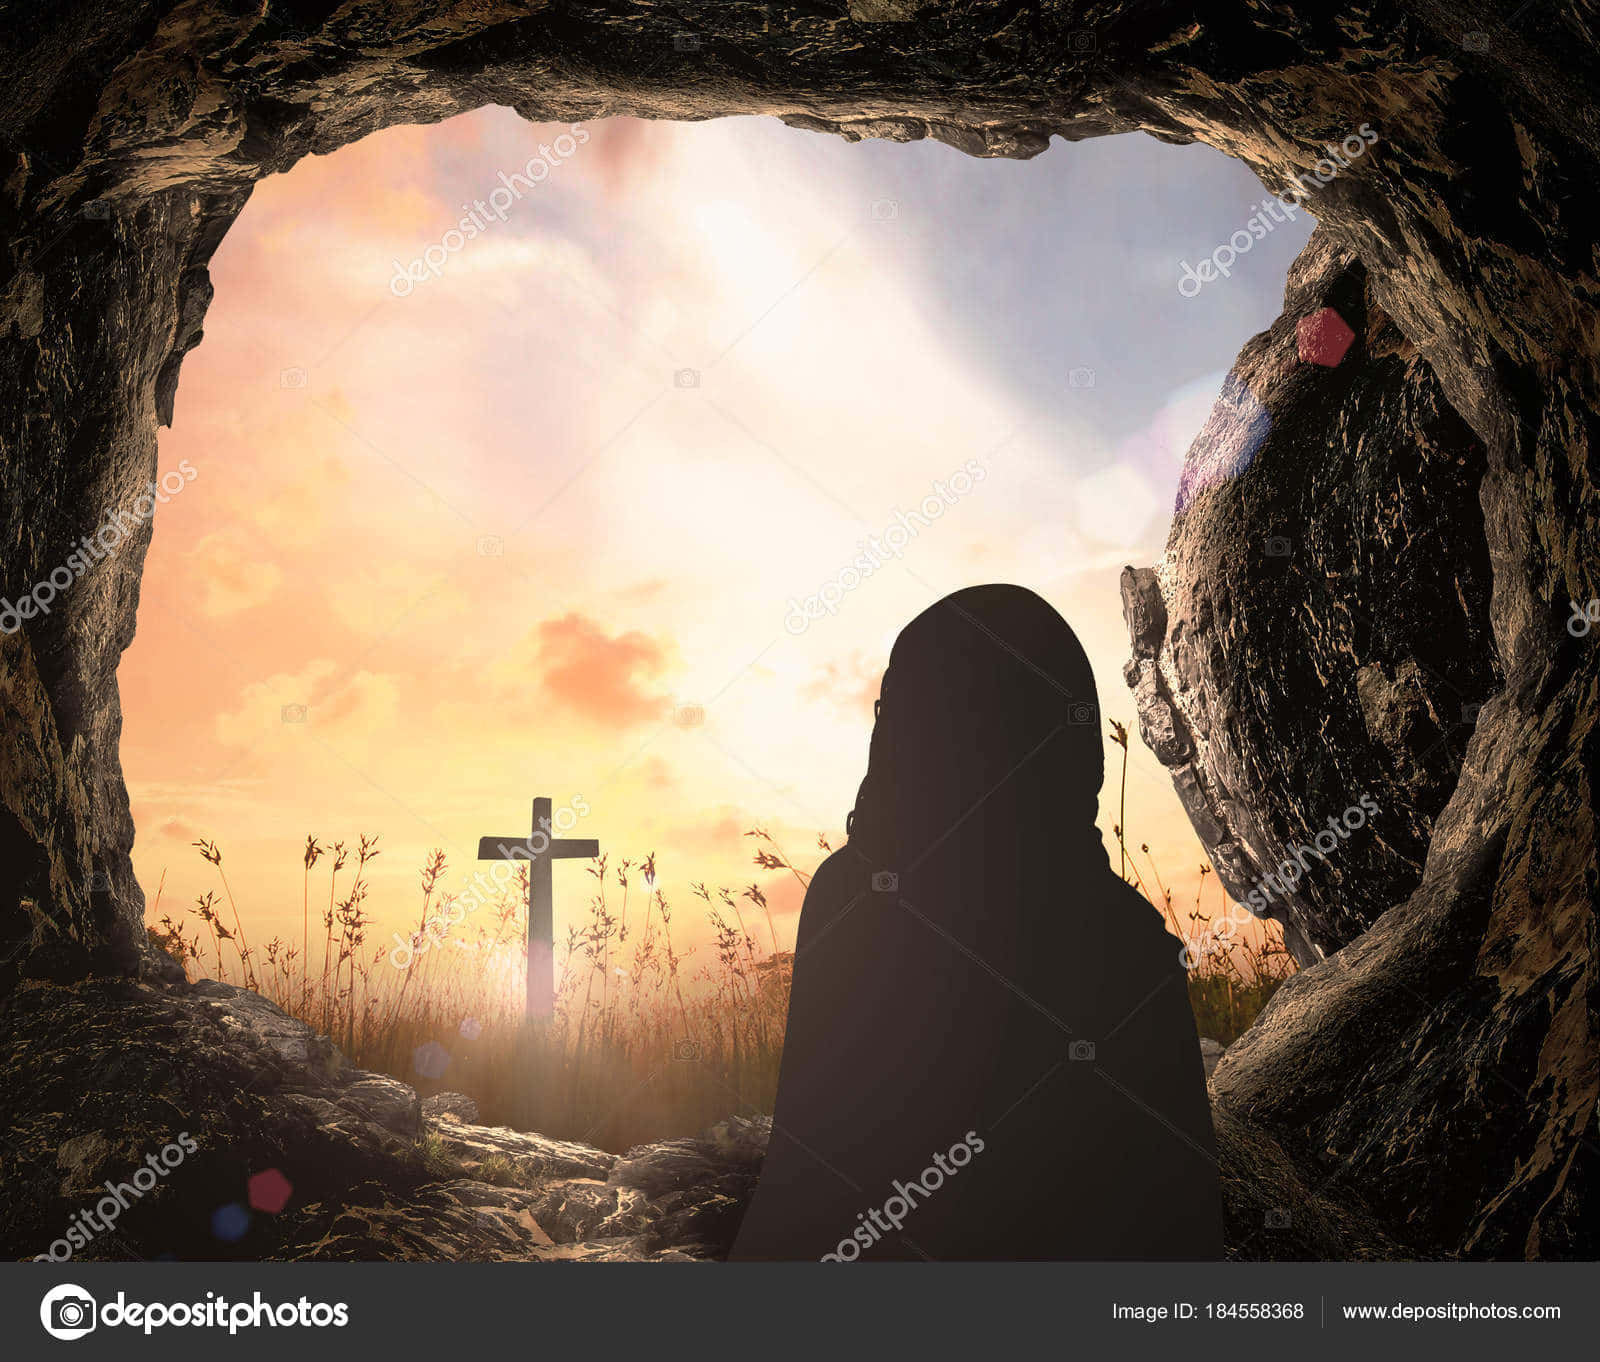 "An Empty Tomb Reminding Us Of The Hope Of Salvation" Wallpaper